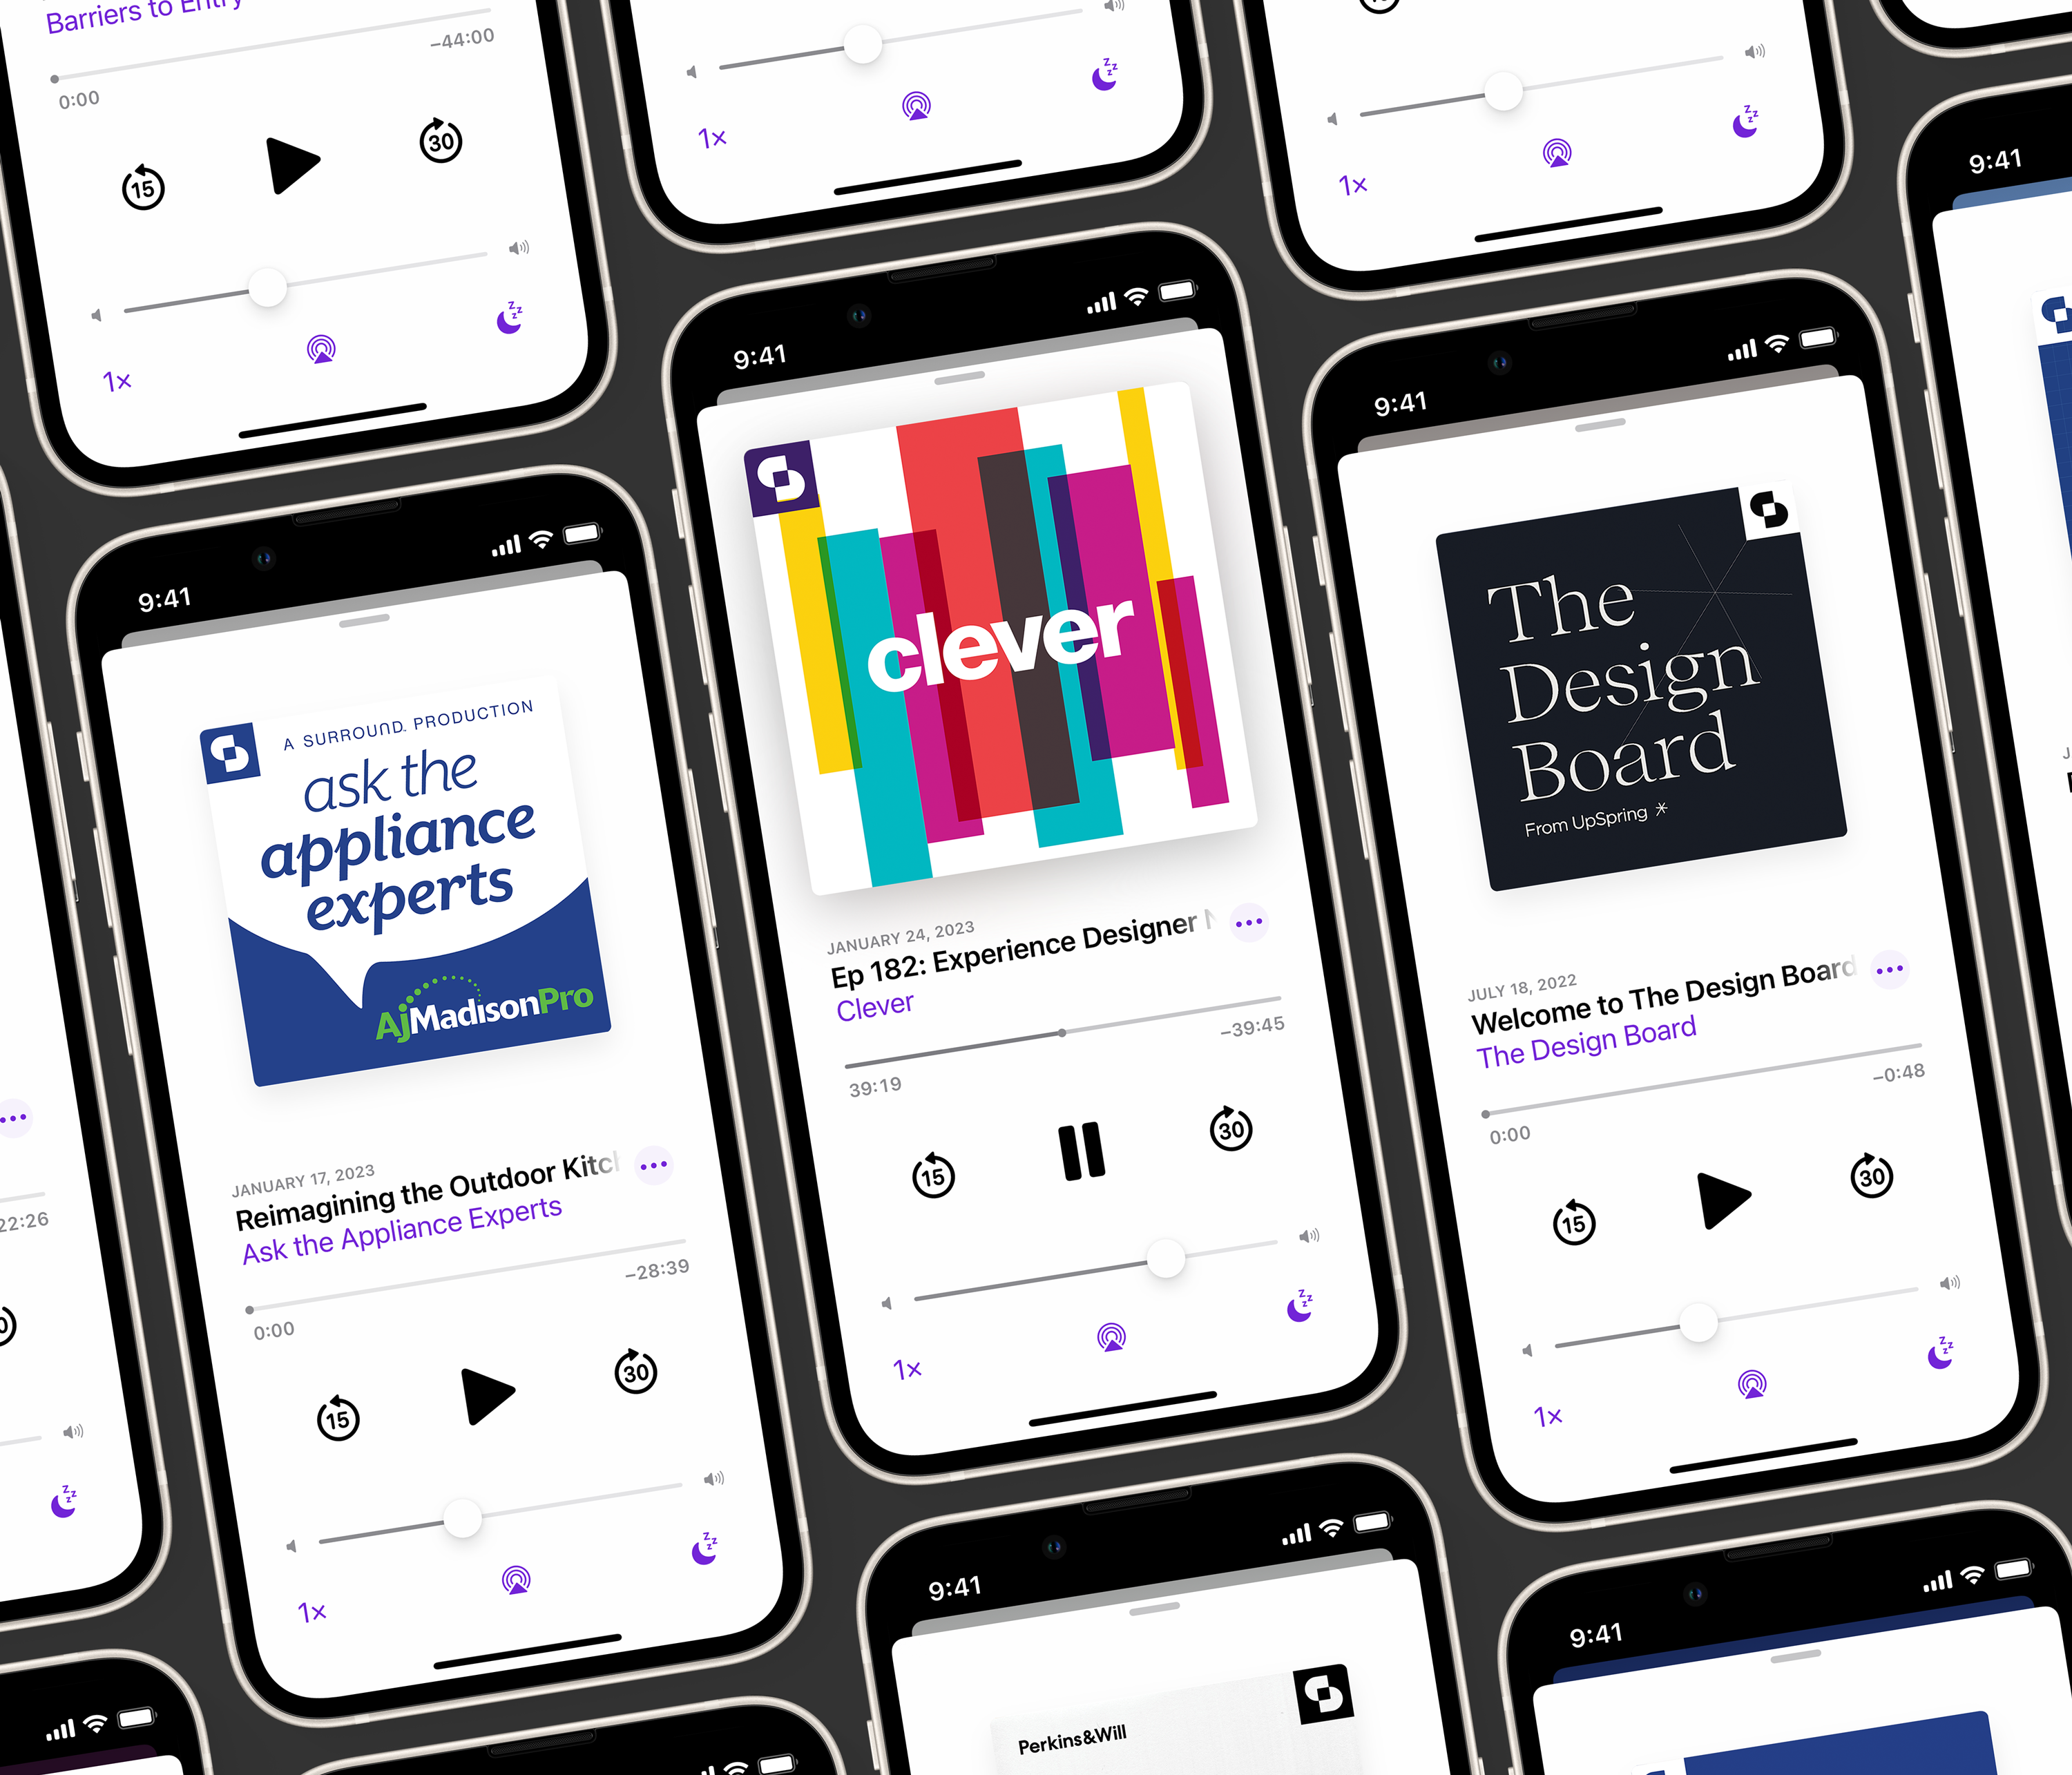 clever and more surround design podcasts on phones